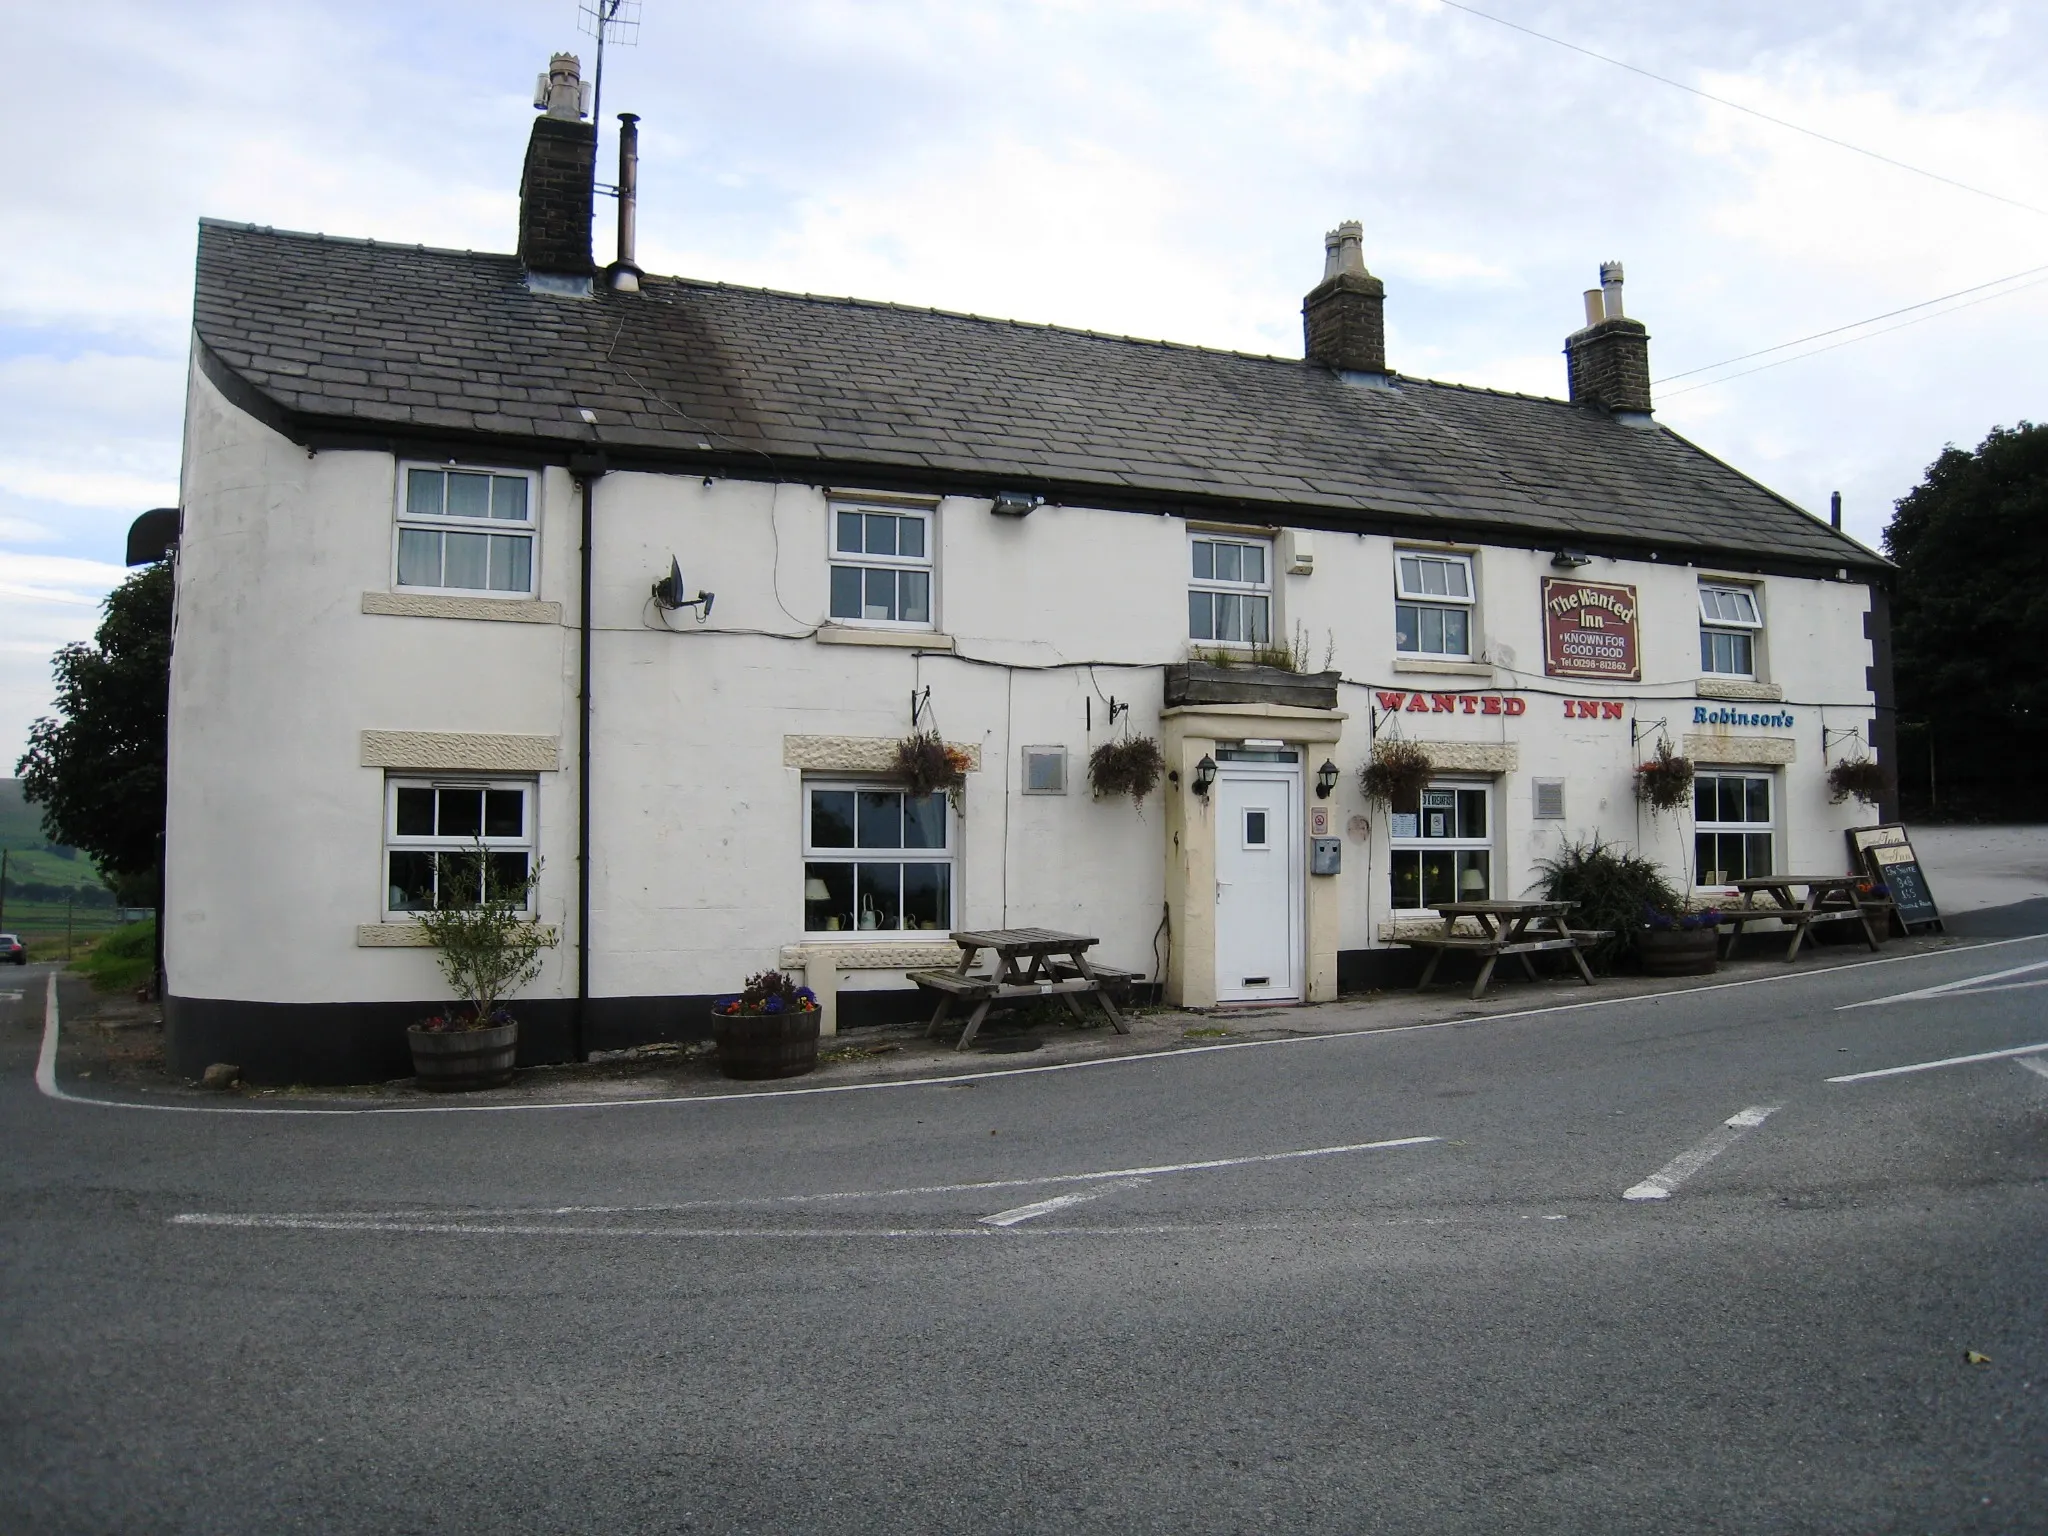 Photo showing: The Wanted Inn at Sparrowpit